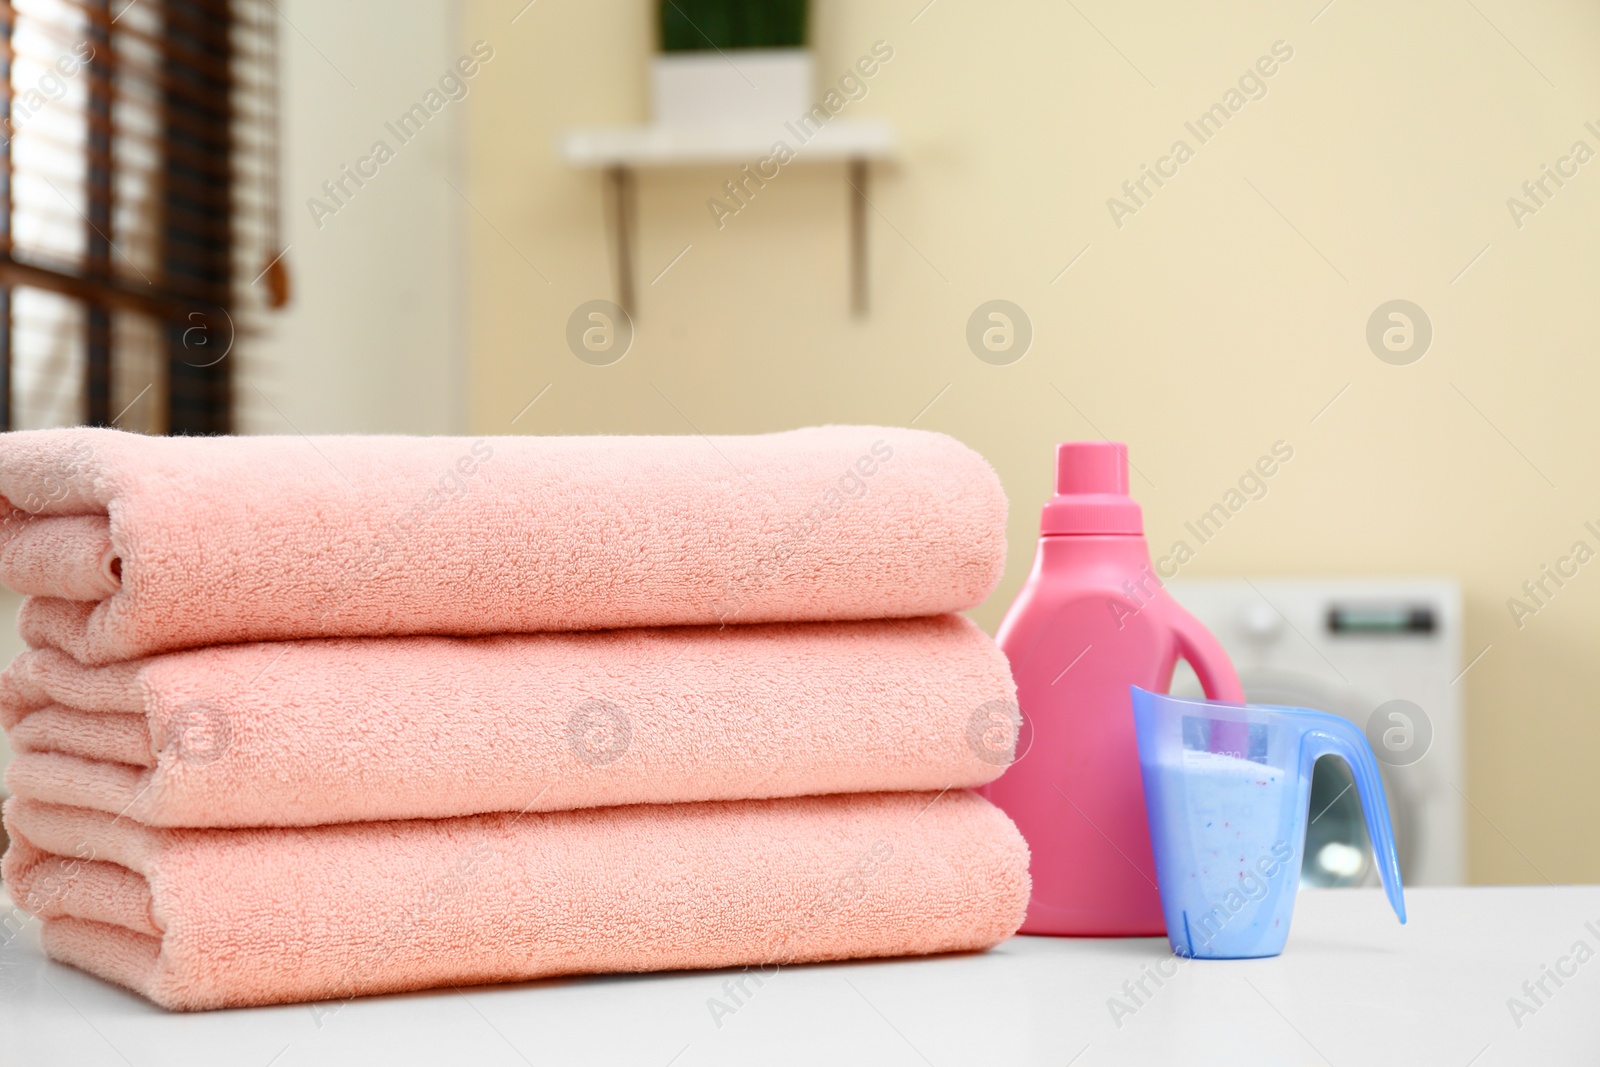 Photo of Stack of clean towels and detergents on table in laundry room